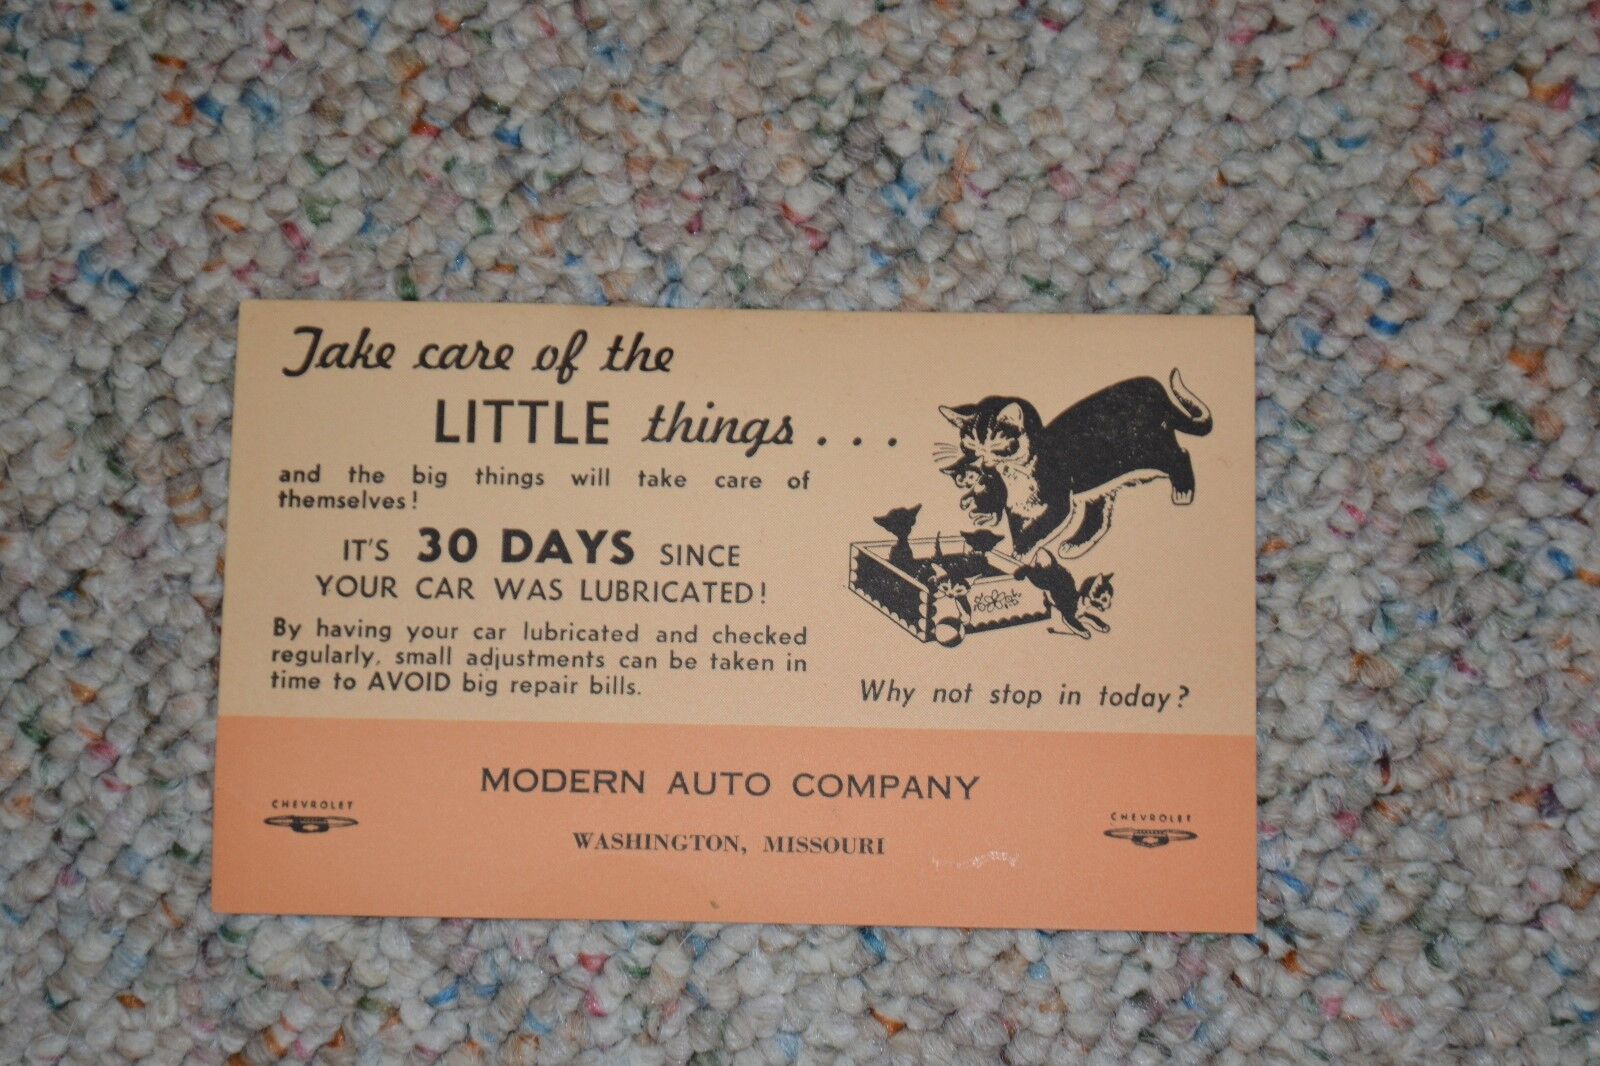 VINTAGE 1950\'s AUTOMOTIVE MAIL SERVICE CARD FROM MODERN AUTO 30 DAY LUBE SERVICE